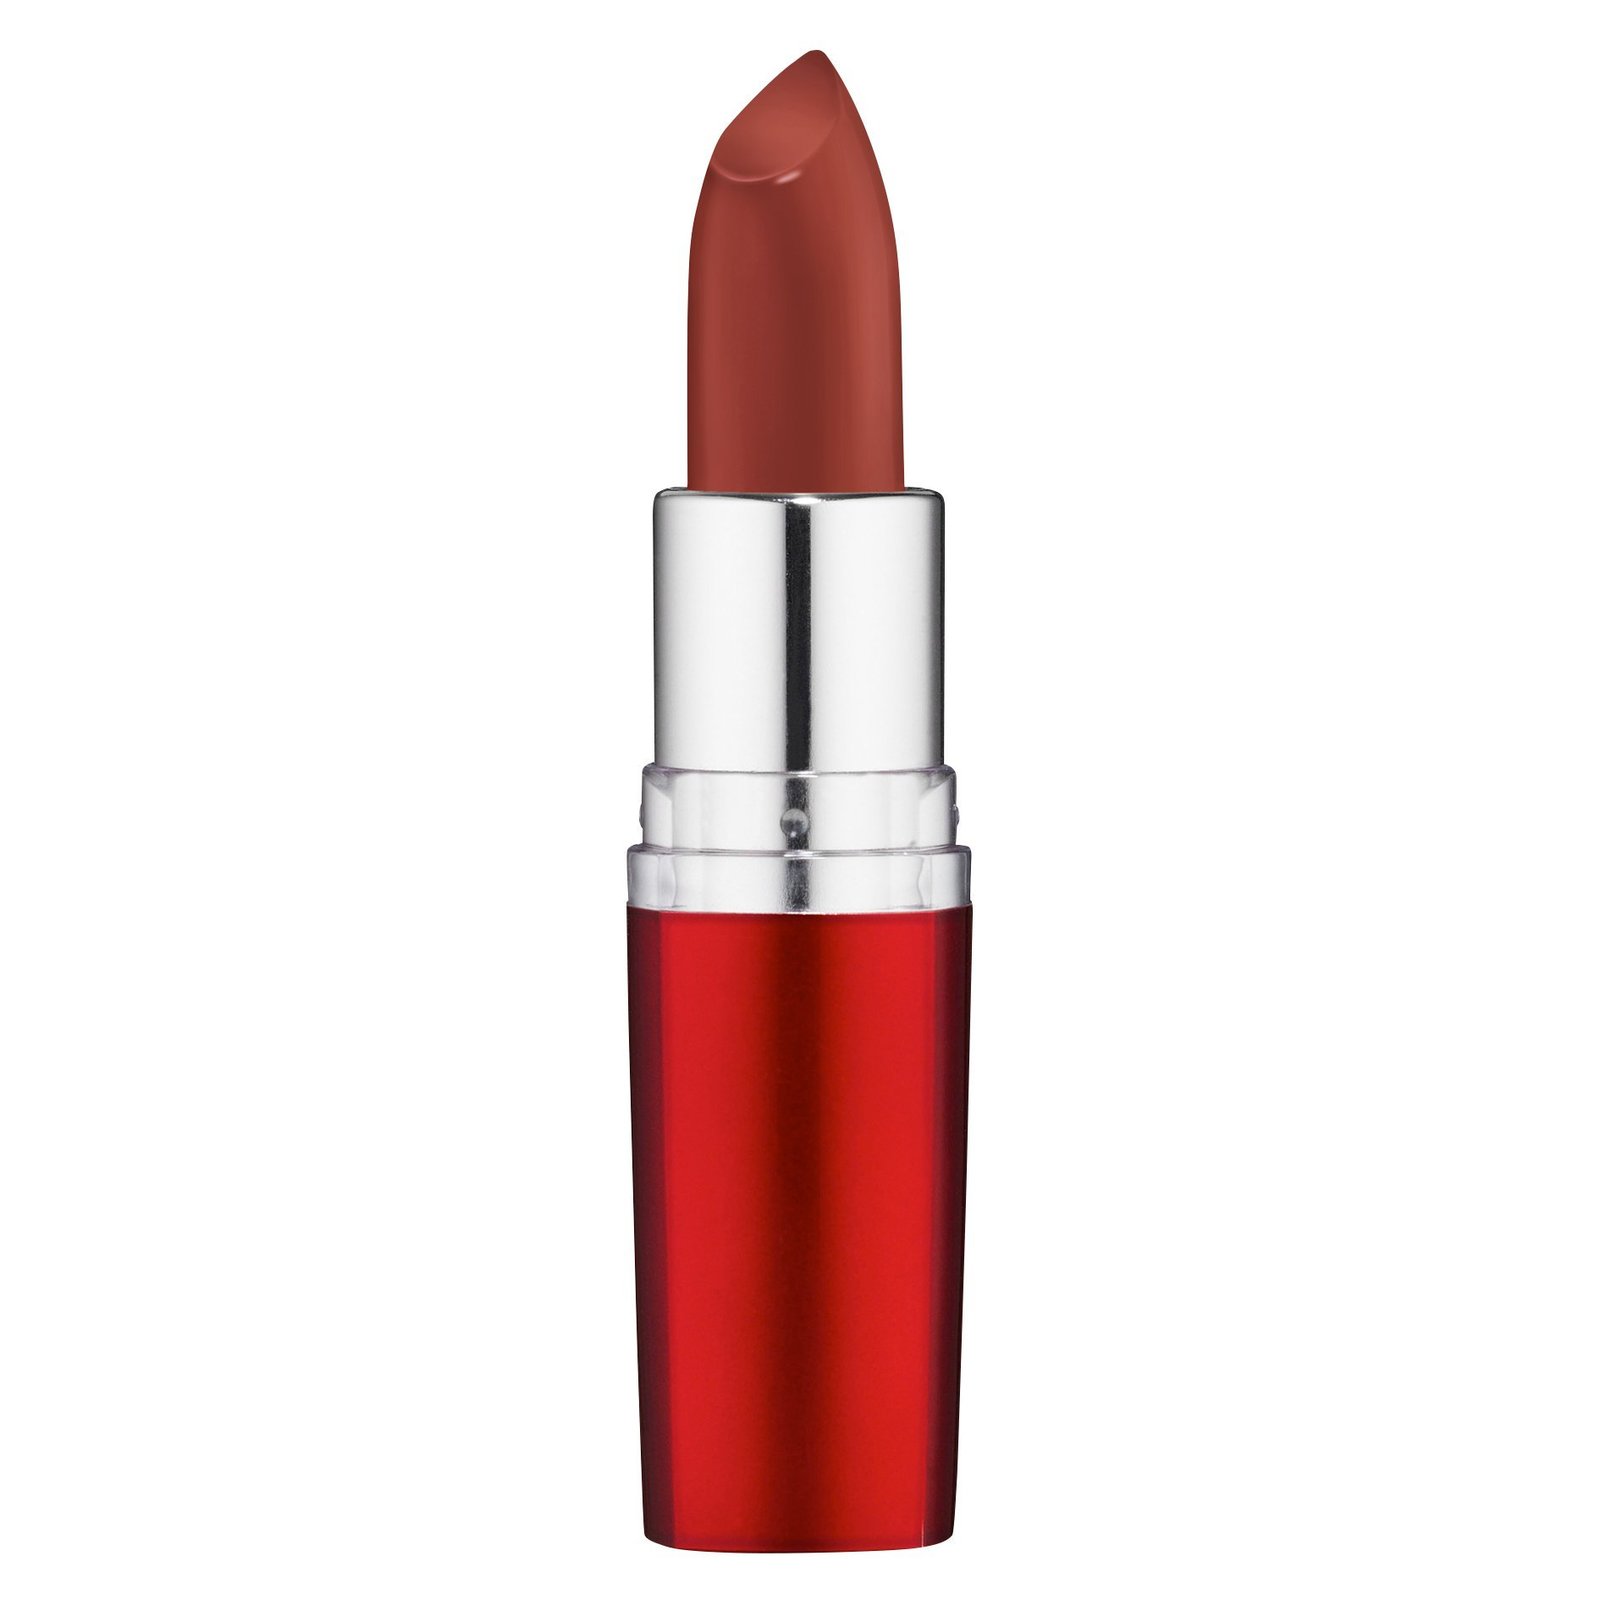 Maybelline Moisture Extreme Lipstick Born with it for Women, No. A34, 0.15 Ounce - $19.59